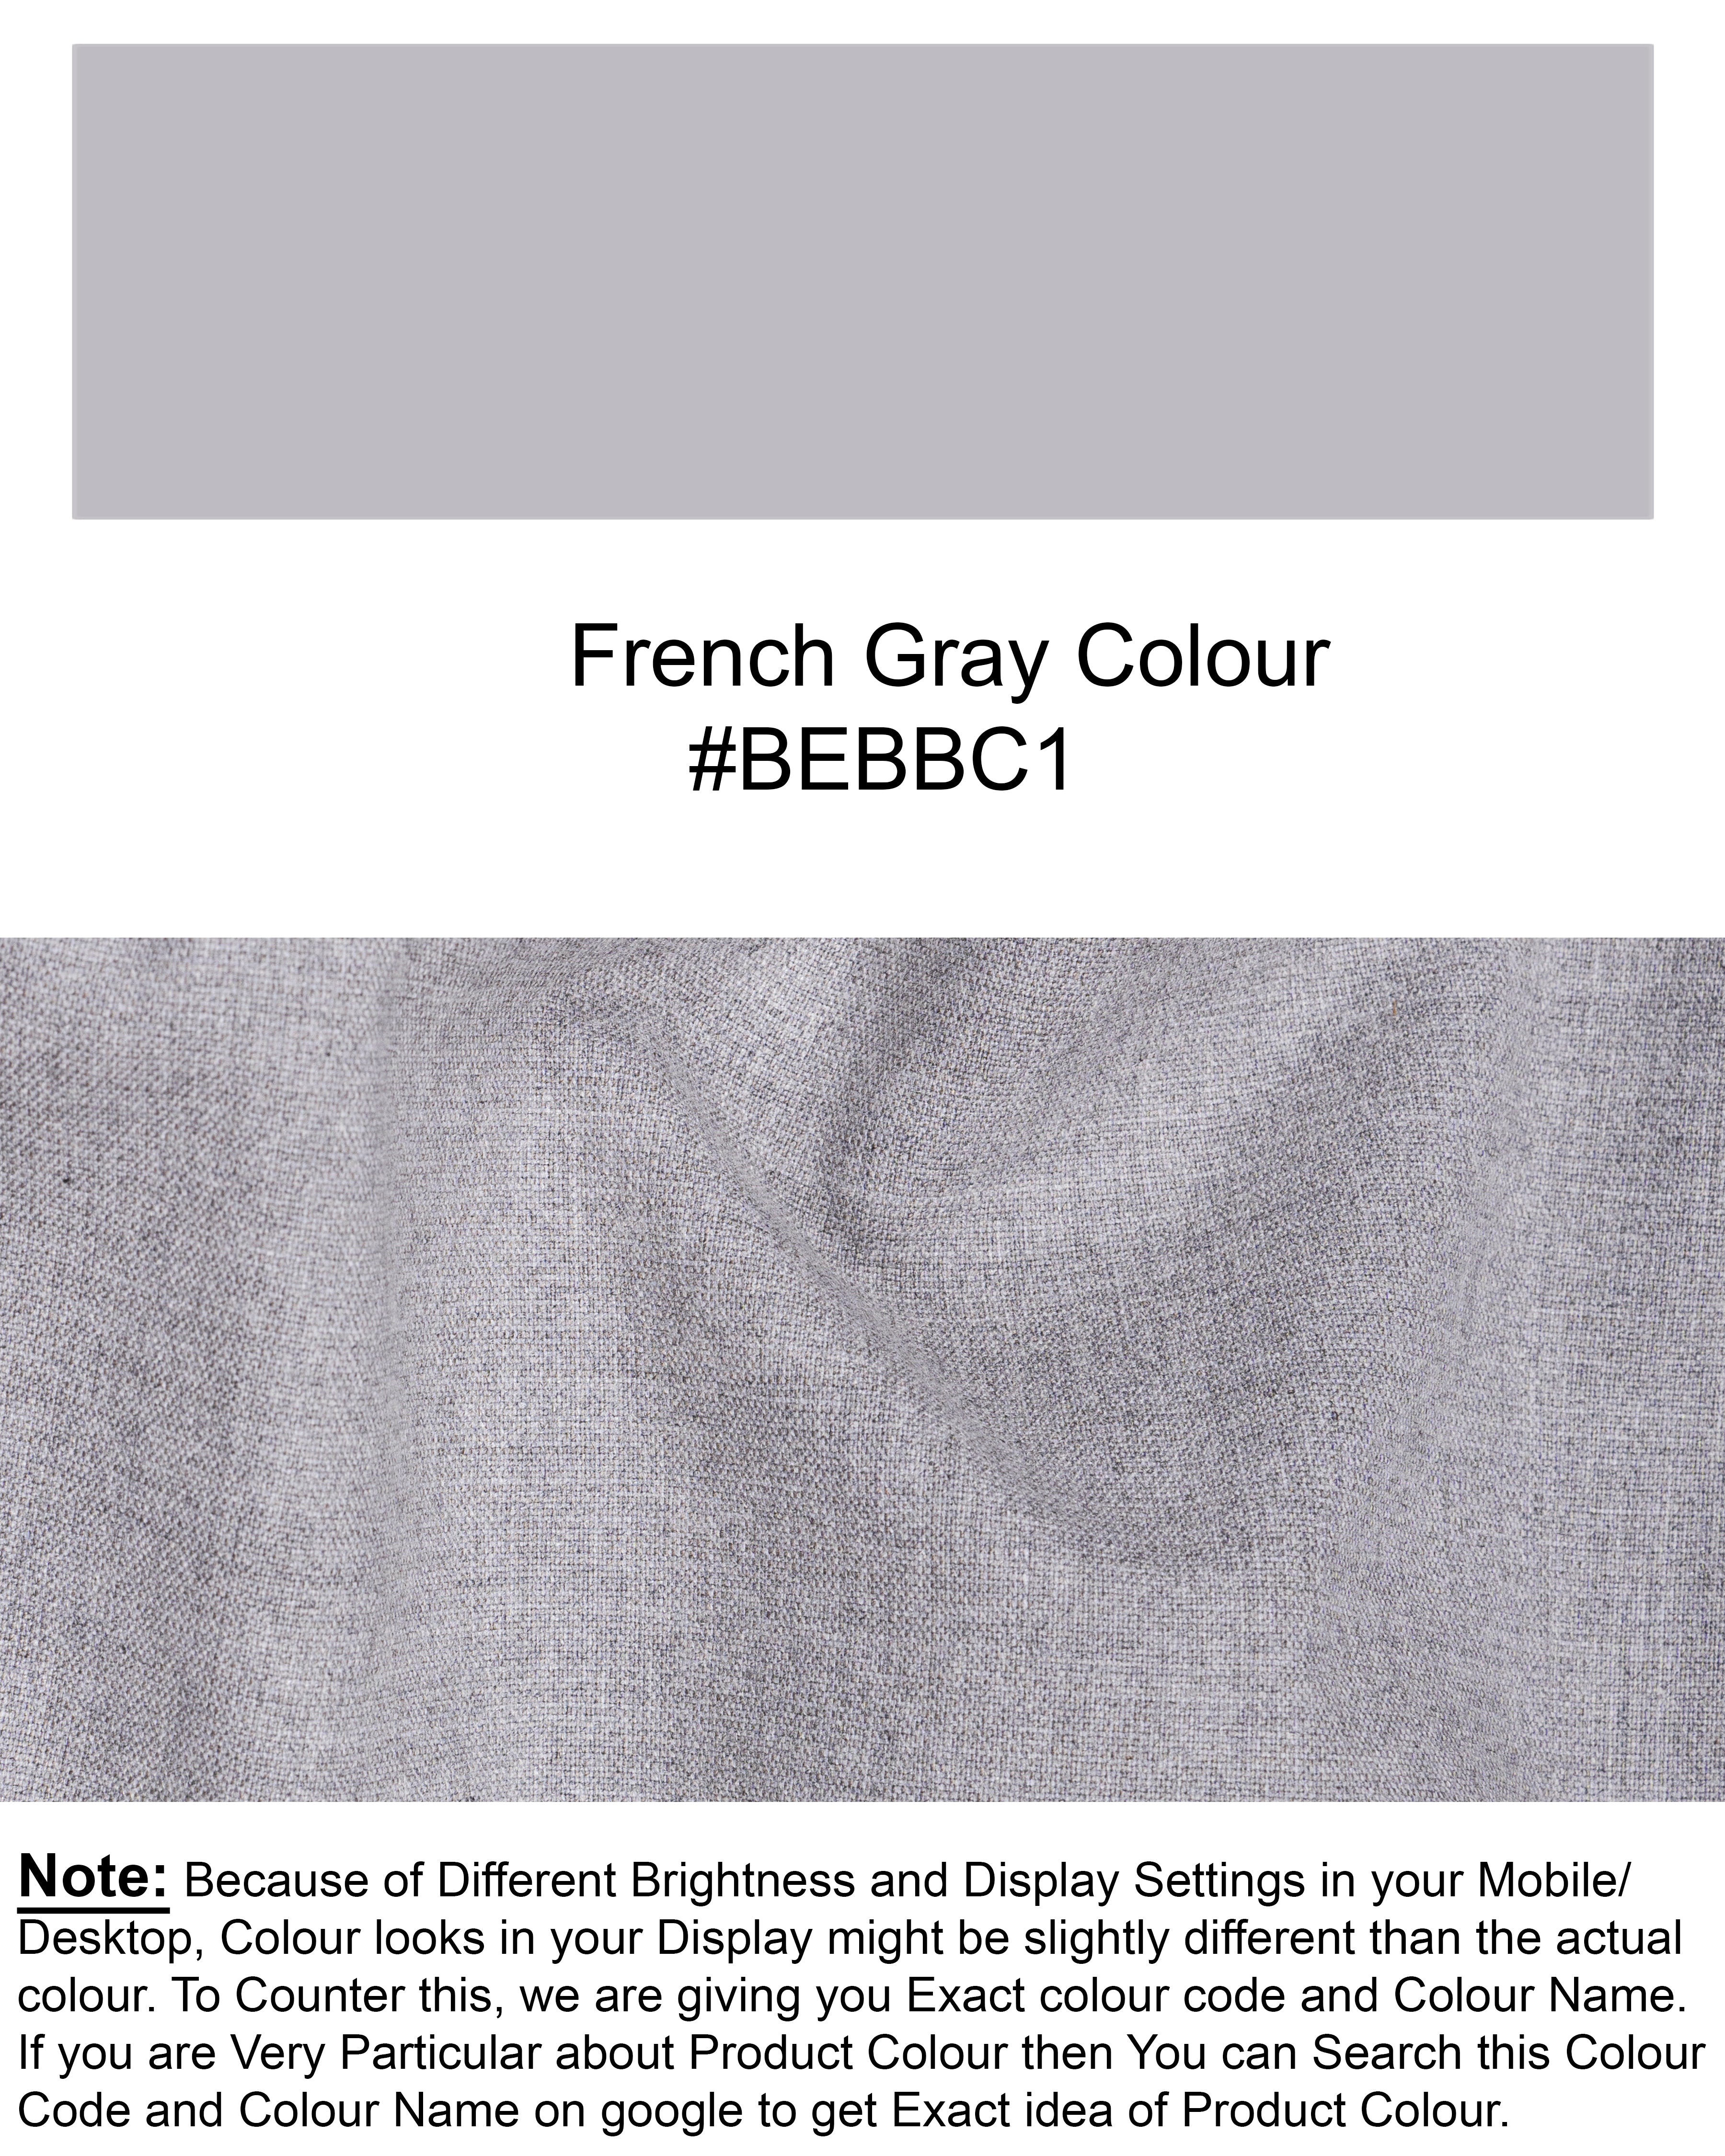 French Gray Double-Breasted Wool Rich Sport Blazer BL1495-DB-PP-36, BL1495-DB-PP-38, BL1495-DB-PP-40, BL1495-DB-PP-42, BL1495-DB-PP-44, BL1495-DB-PP-46, BL1495-DB-PP-48, BL1495-DB-PP-50, BL1495-DB-PP-52, BL1495-DB-PP-54, BL1495-DB-PP-56, BL1495-DB-PP-58, BL1495-DB-PP-60